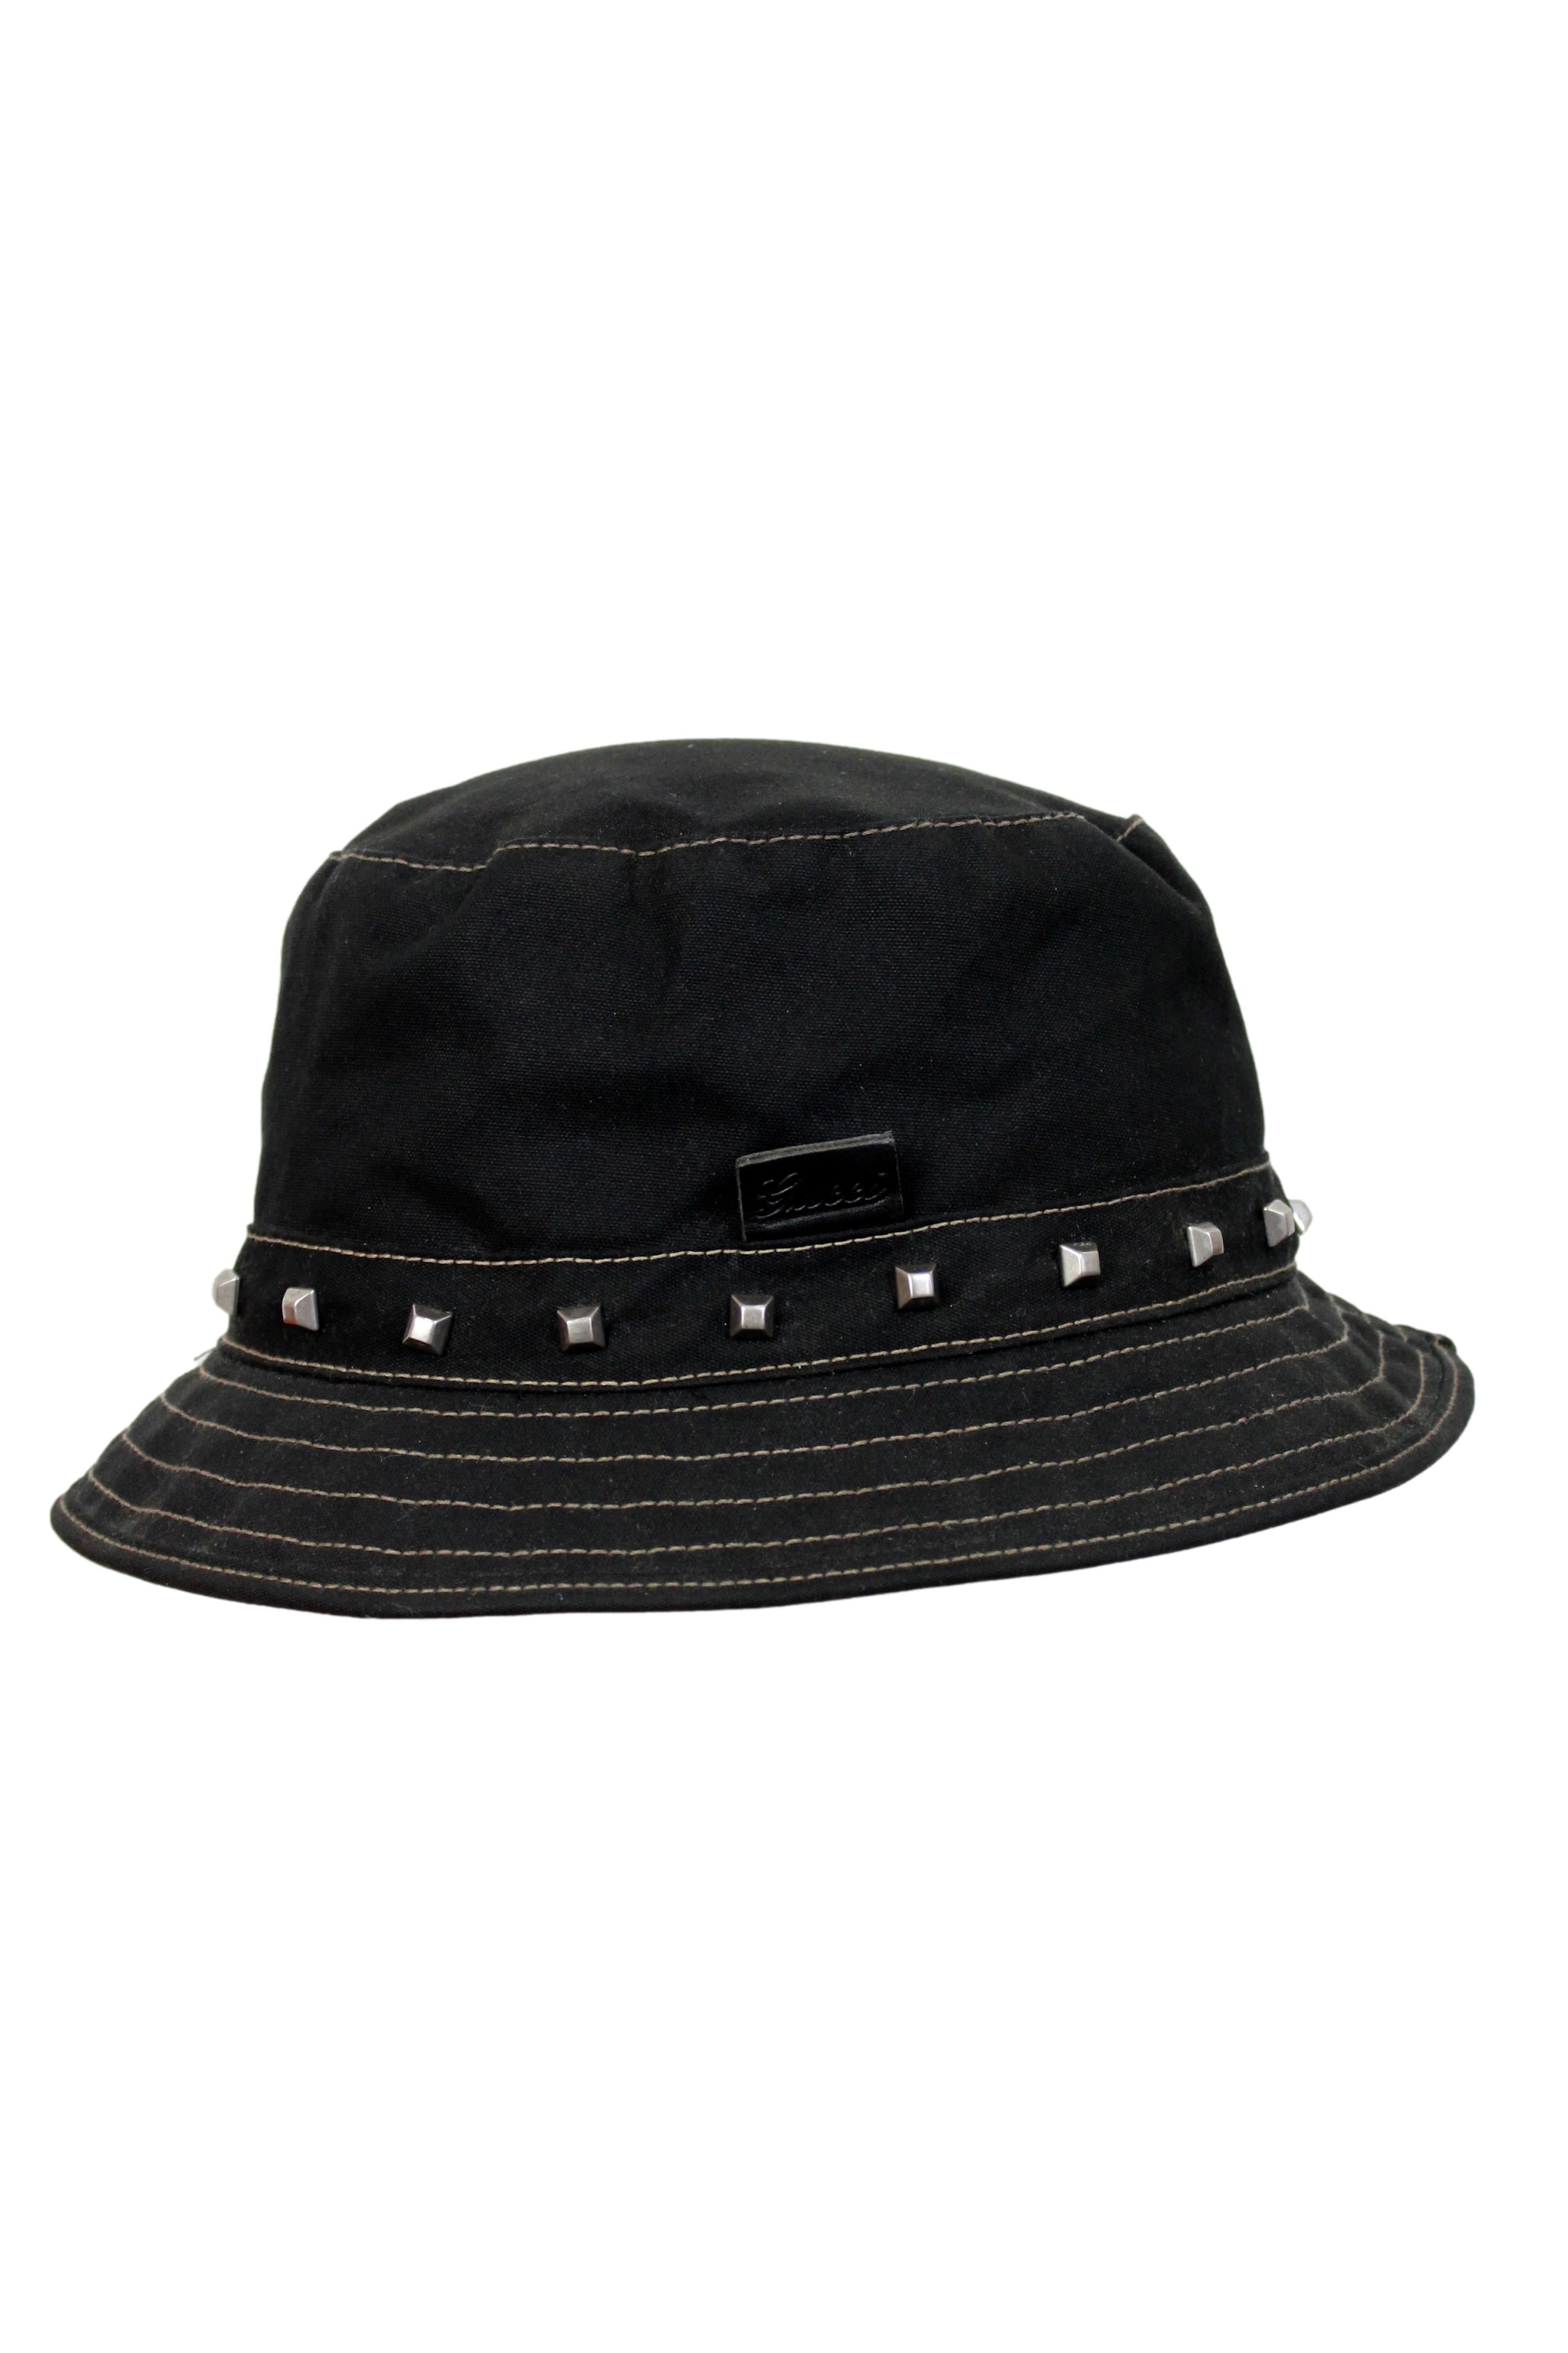 Gucci 2000s women's hat. Fedora model hat, stud applications along the whole hat. Cotton fabric, black with beige stitching. Inside leather inserts Made in Italy.

Condition: Excellent Item

Used few times, it remains in its excellent condition.